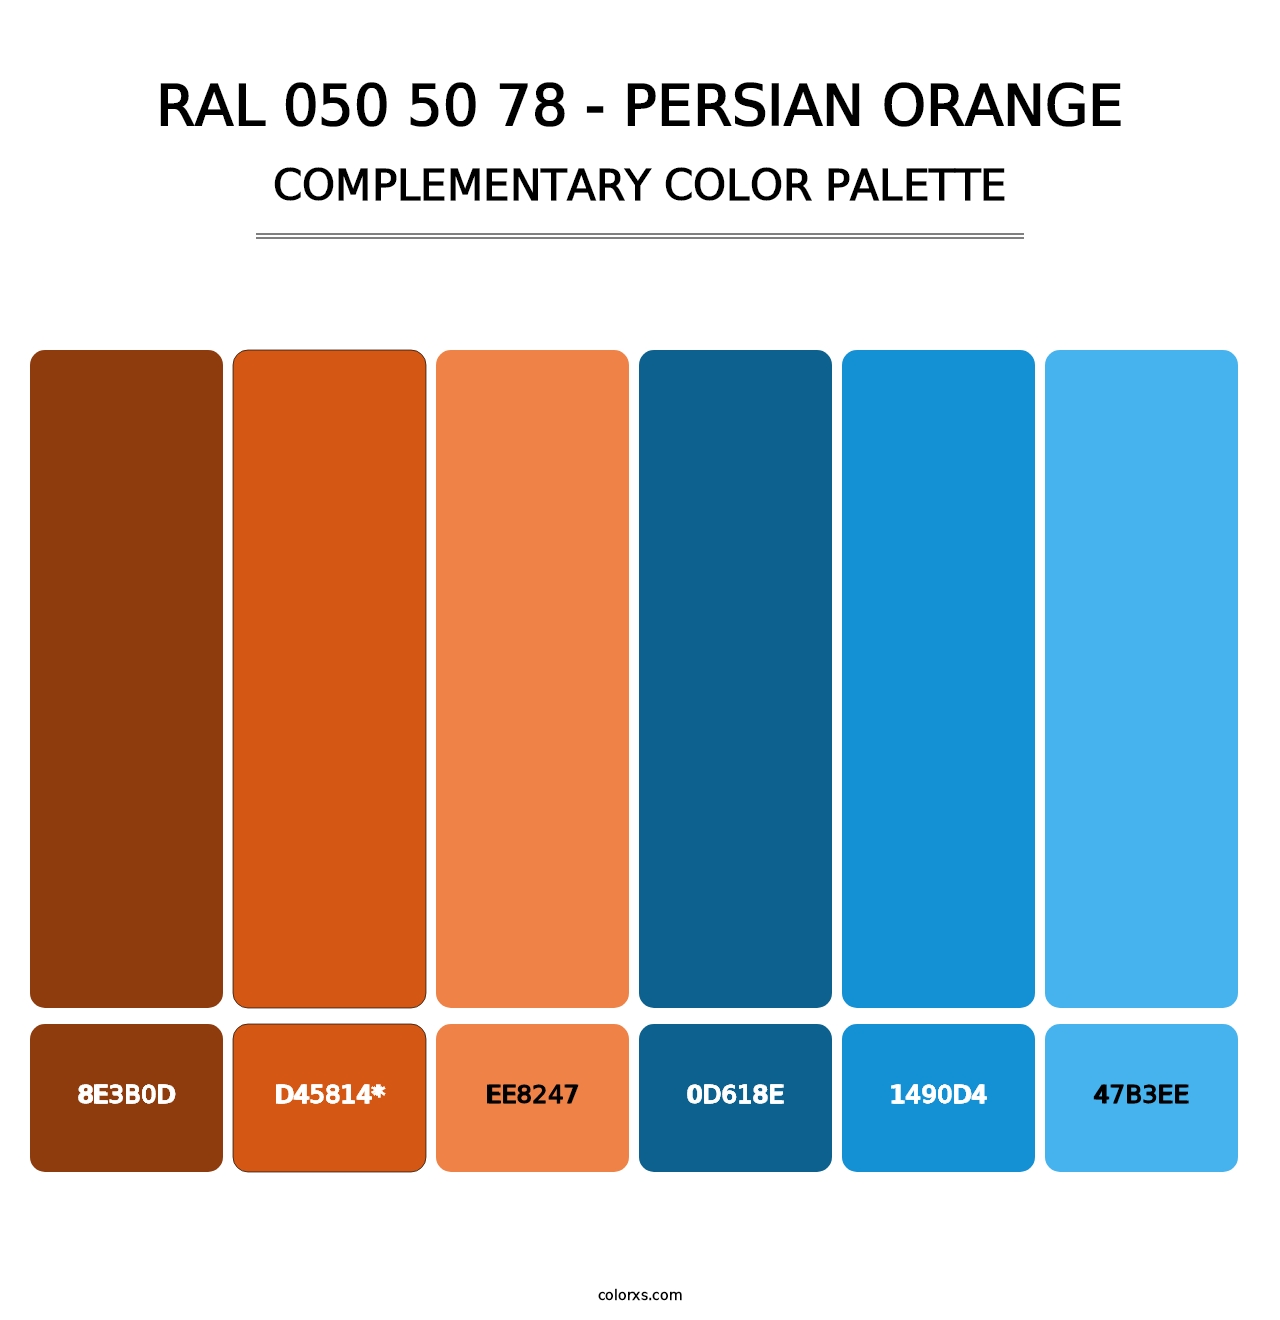 RAL 050 50 78 - Persian Orange - Complementary Color Palette